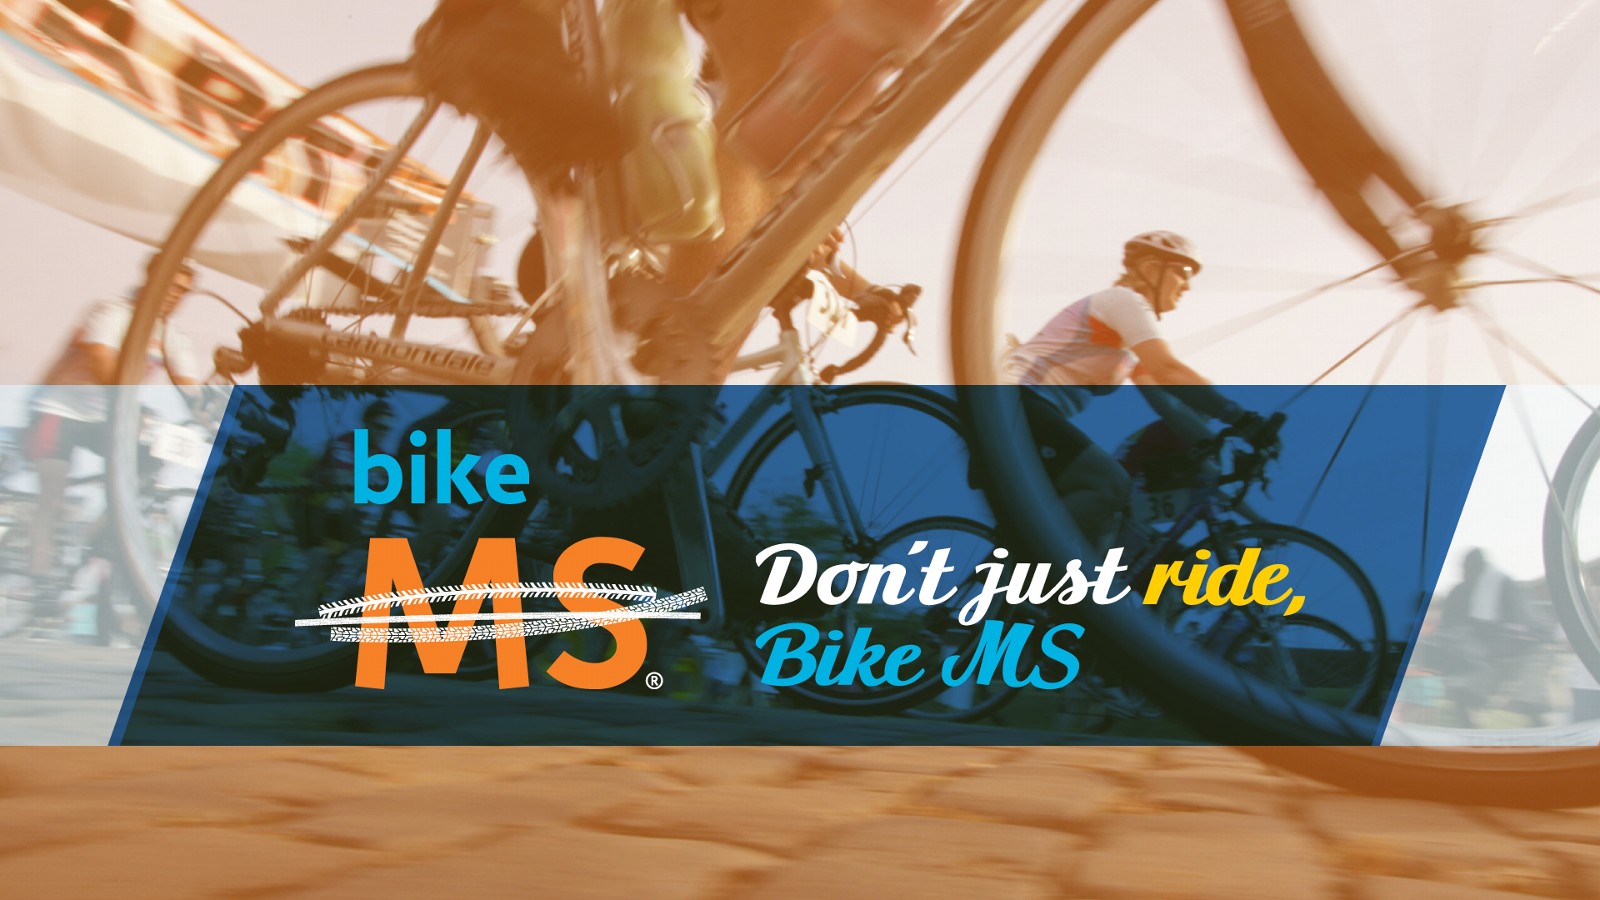 Don't just ride, Bike MS